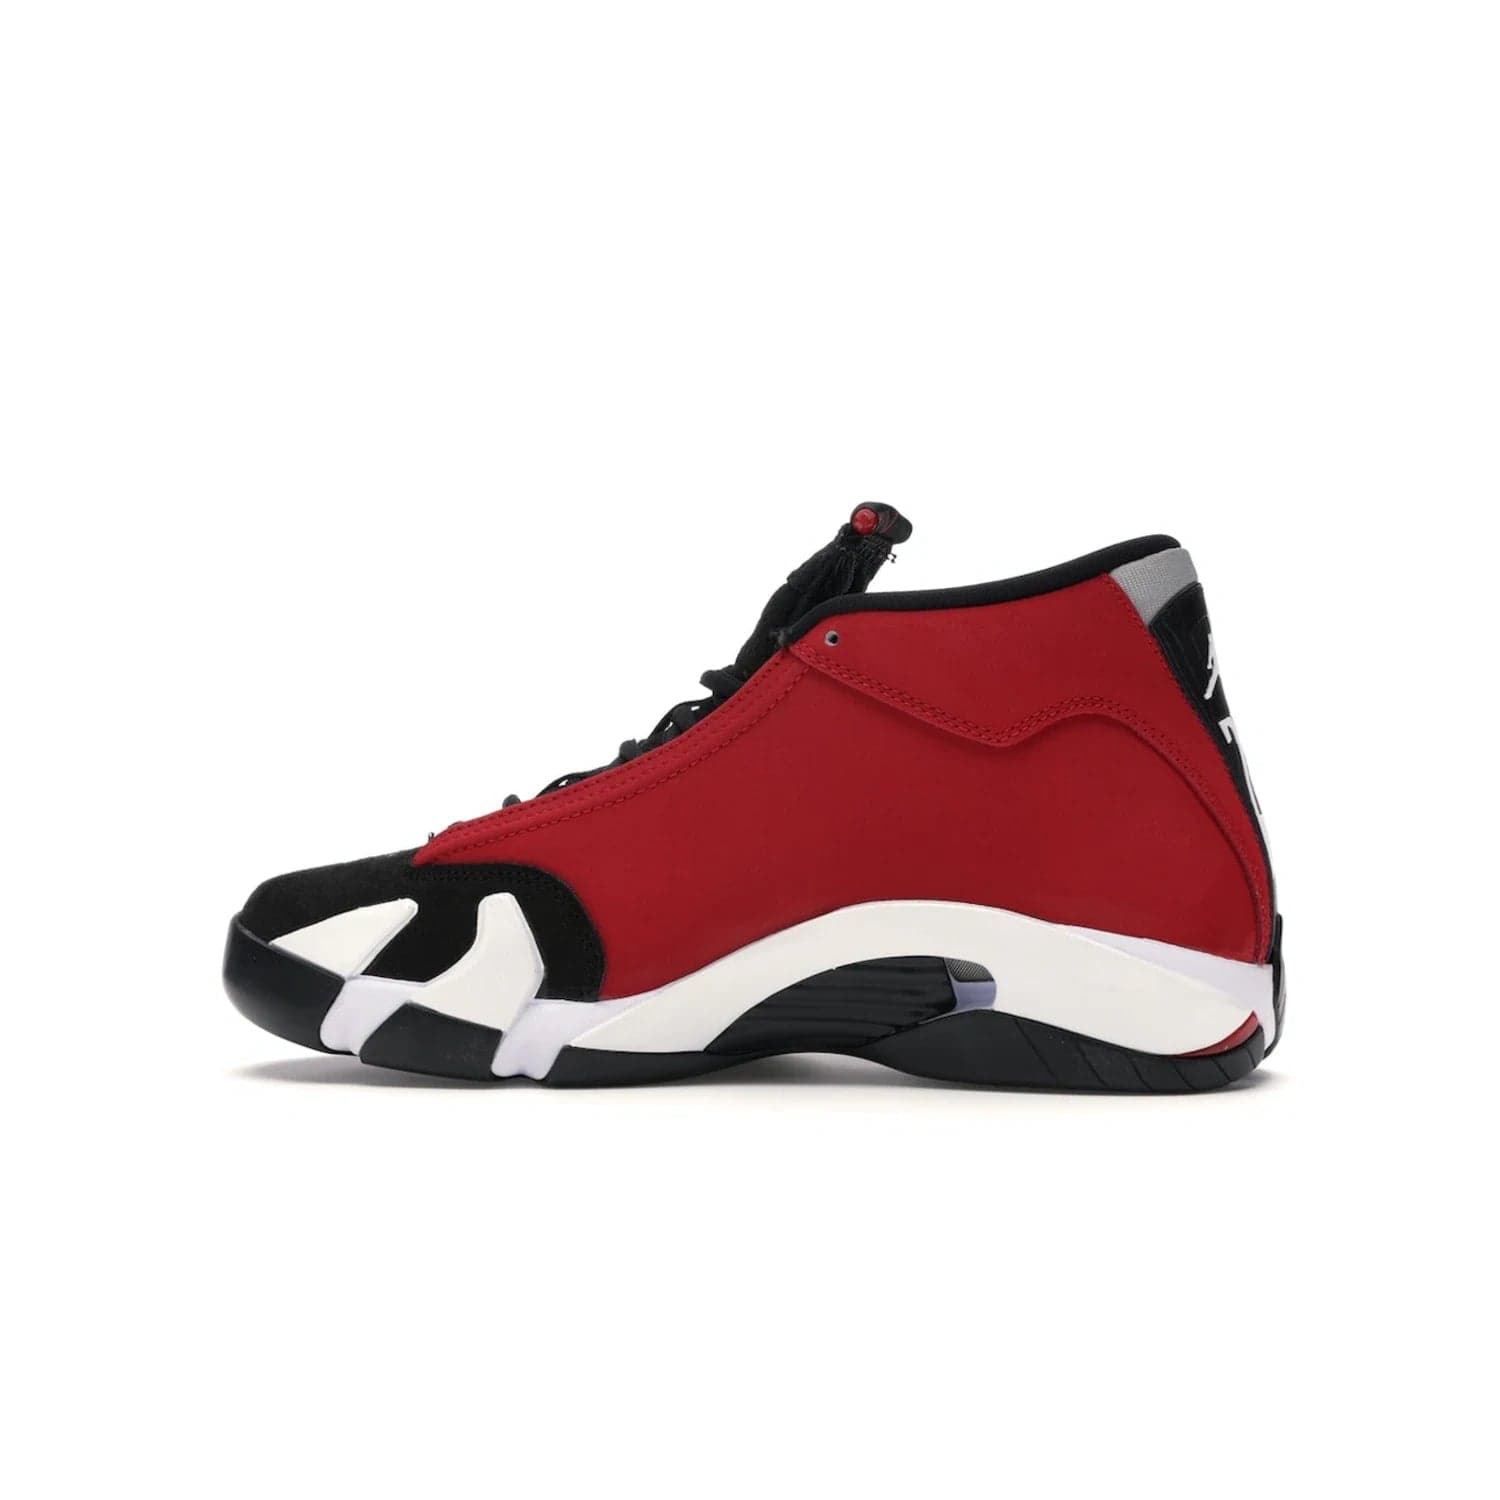 Jordan 14 Retro Gym Red Toro - Image 20 - Only at www.BallersClubKickz.com - Feel the Chicago Bulls energy with the Jordan 14 Retro Gym Red Toro! Black, red, and white design unites performance and fashion. Get your hands on this limited edition Jordan and show off your style today.